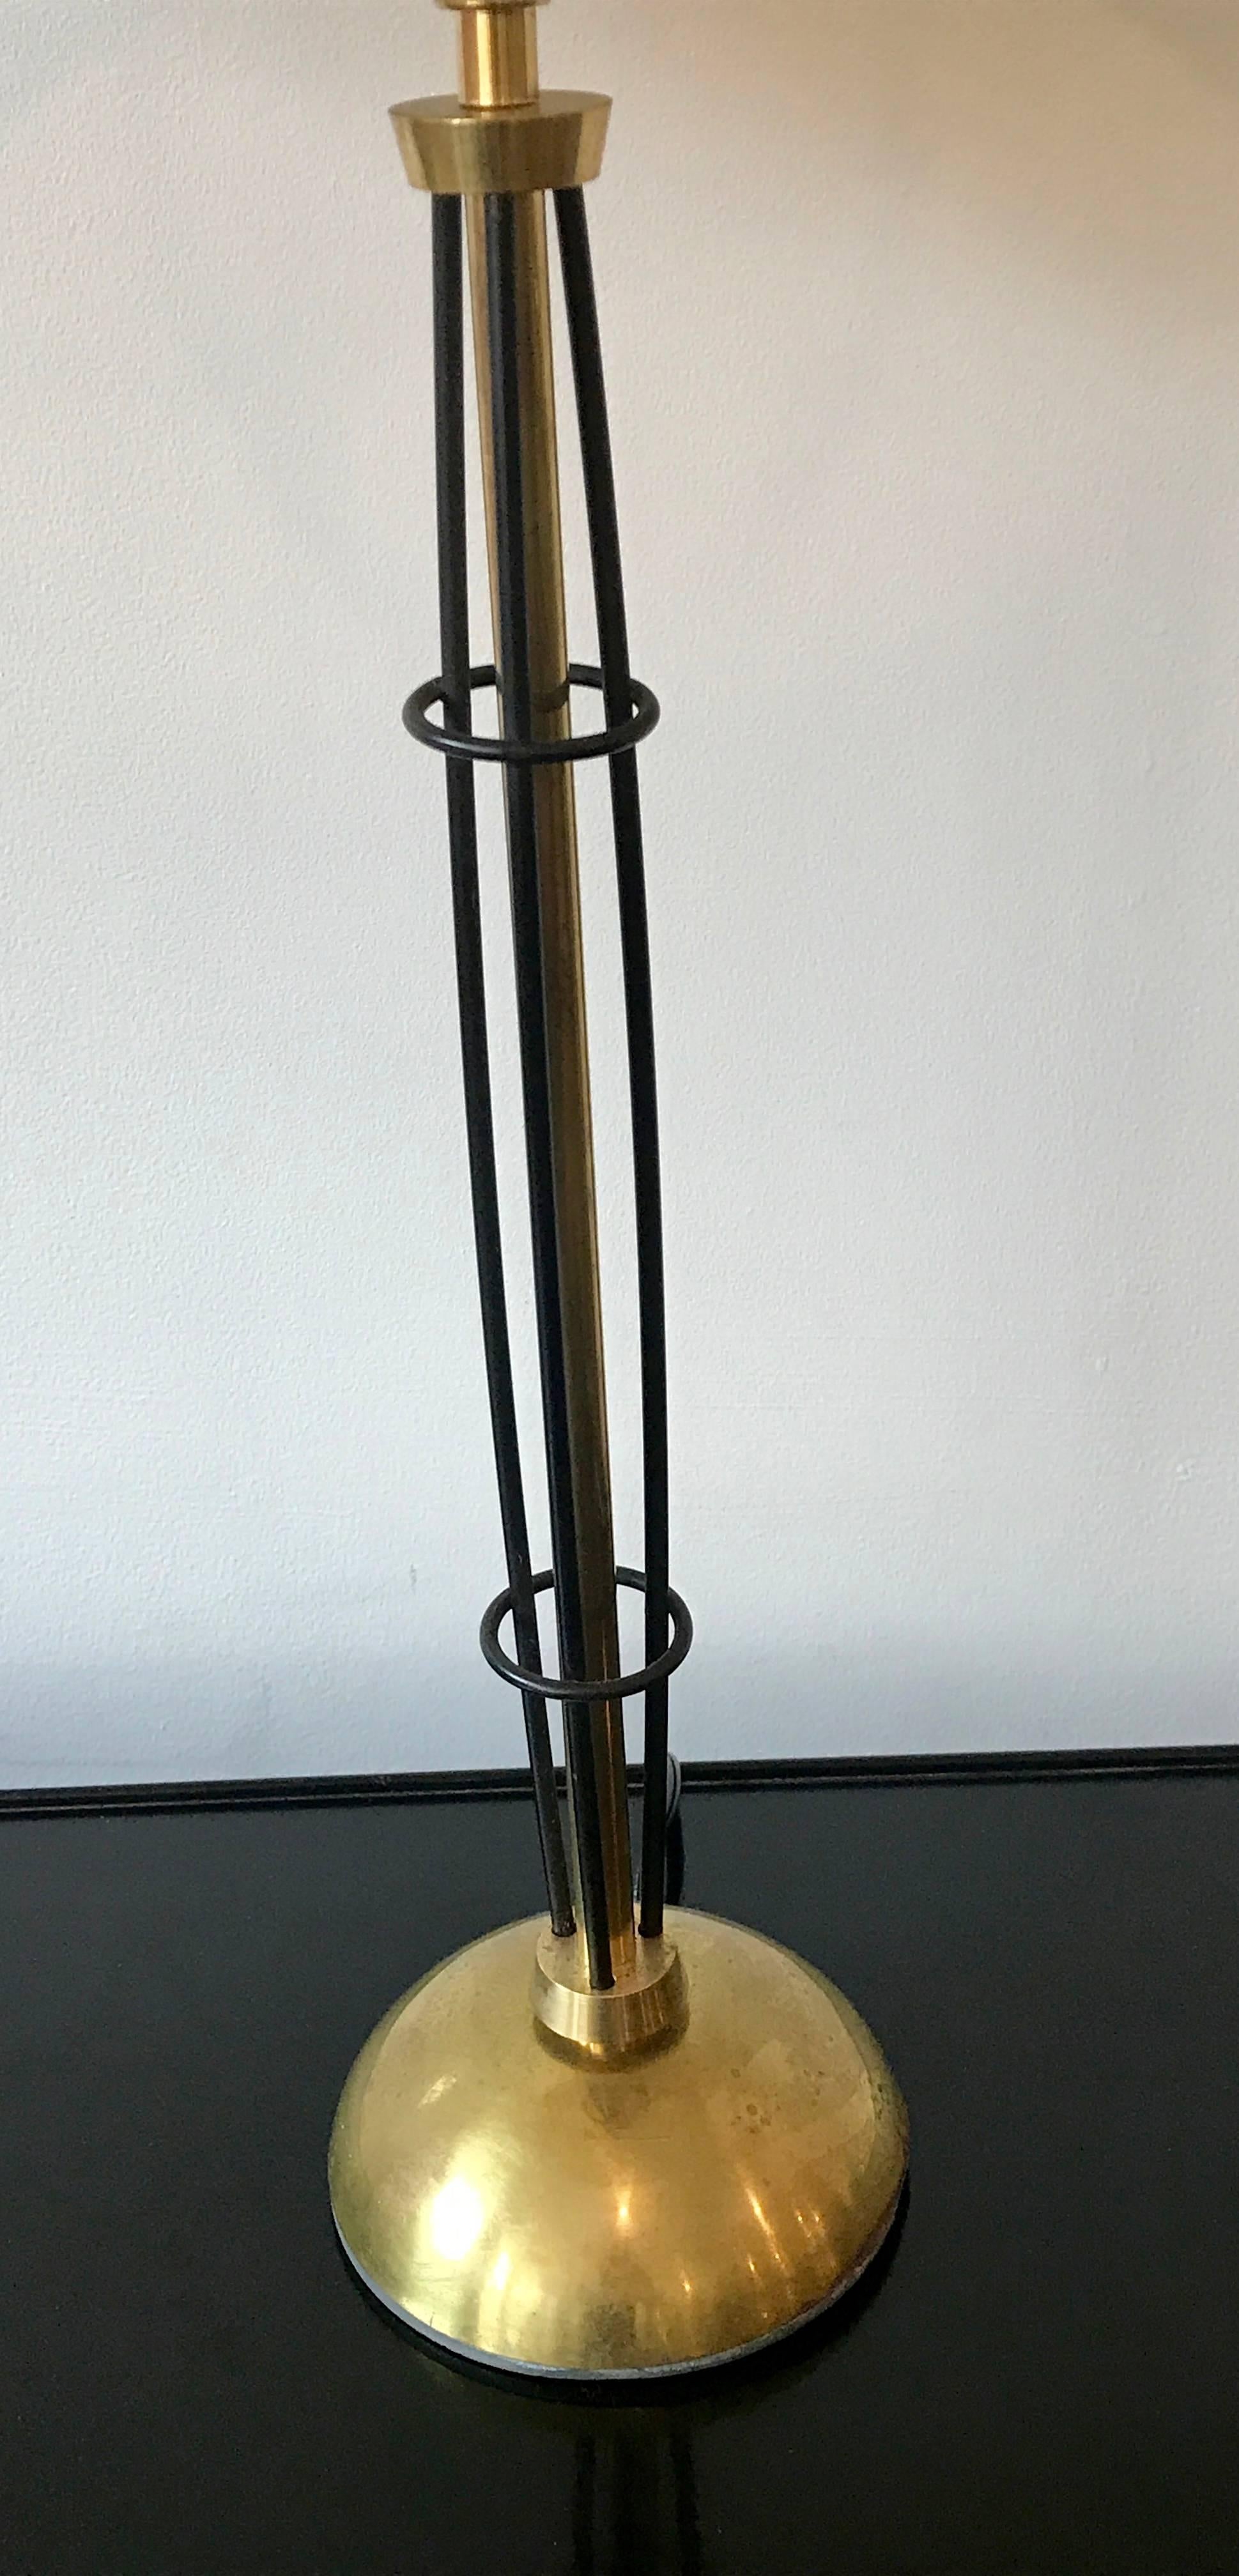 American Mid-Century Modern Industrial Brass and Wrought Iron Table Lamp, 1950's For Sale